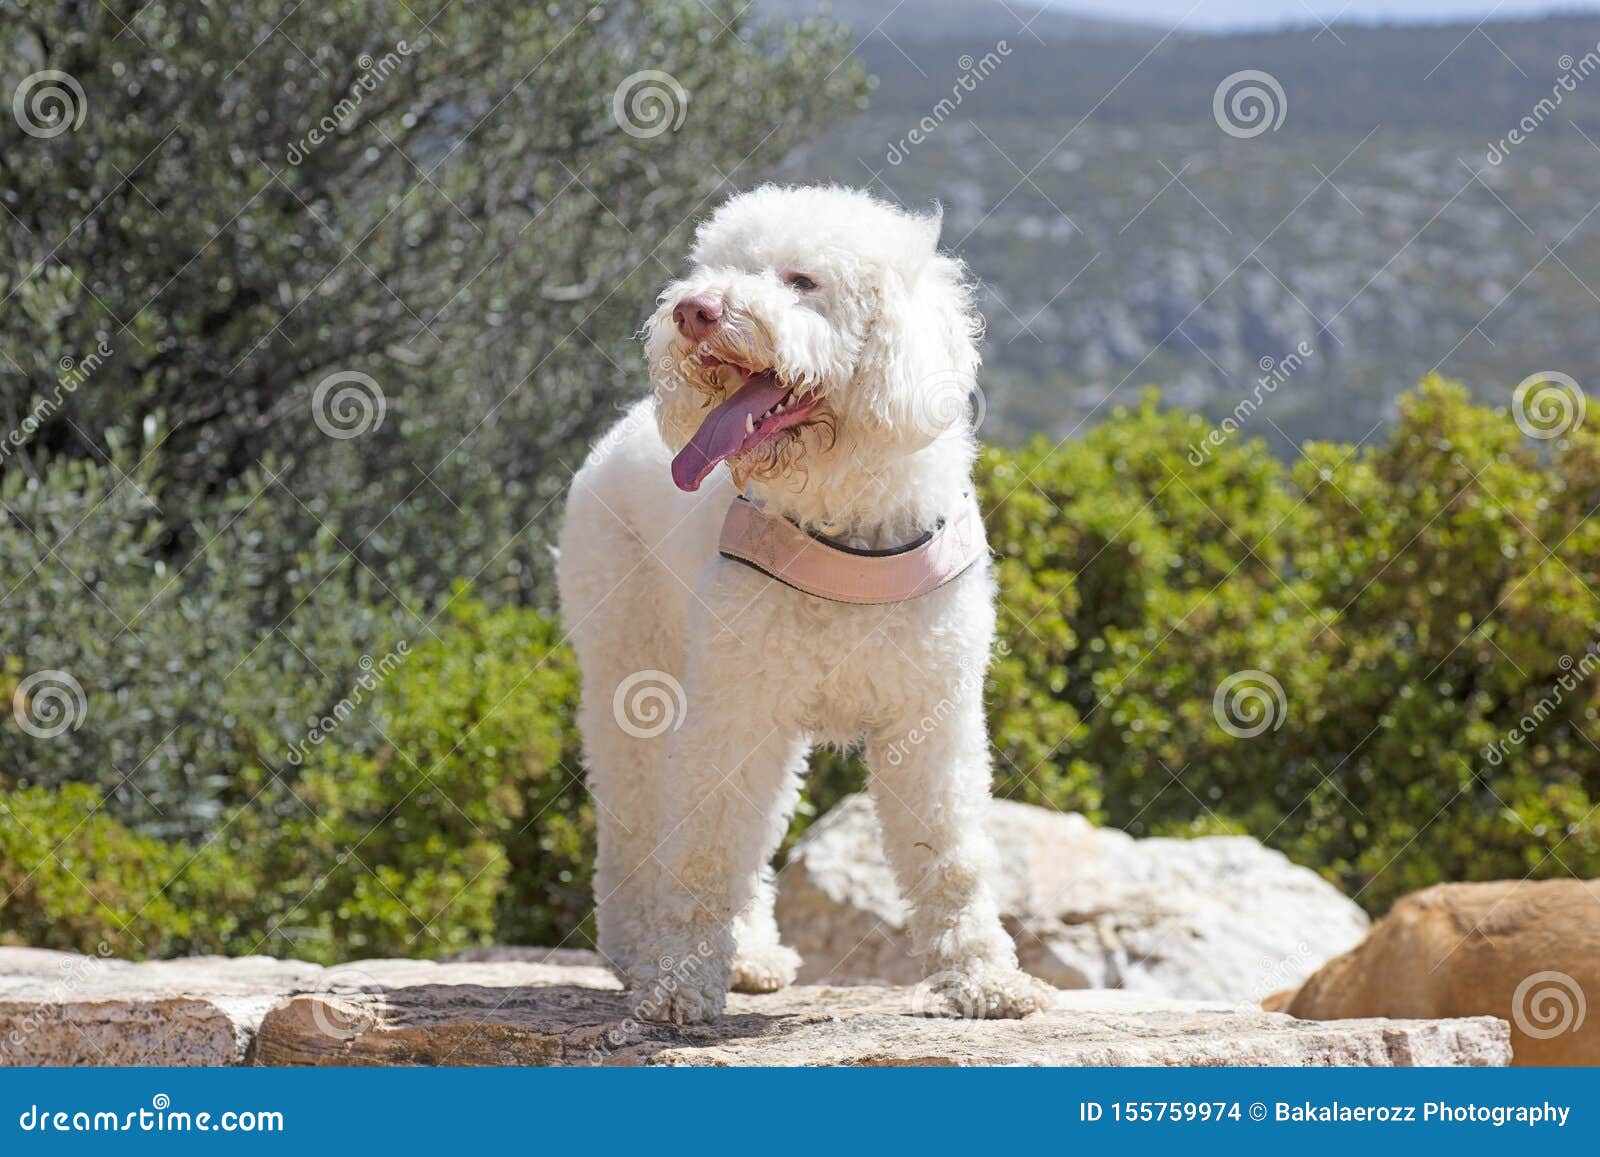 white lagotto romagnolo dog portrait macro background fine art in high quality prints products fifty megapixels